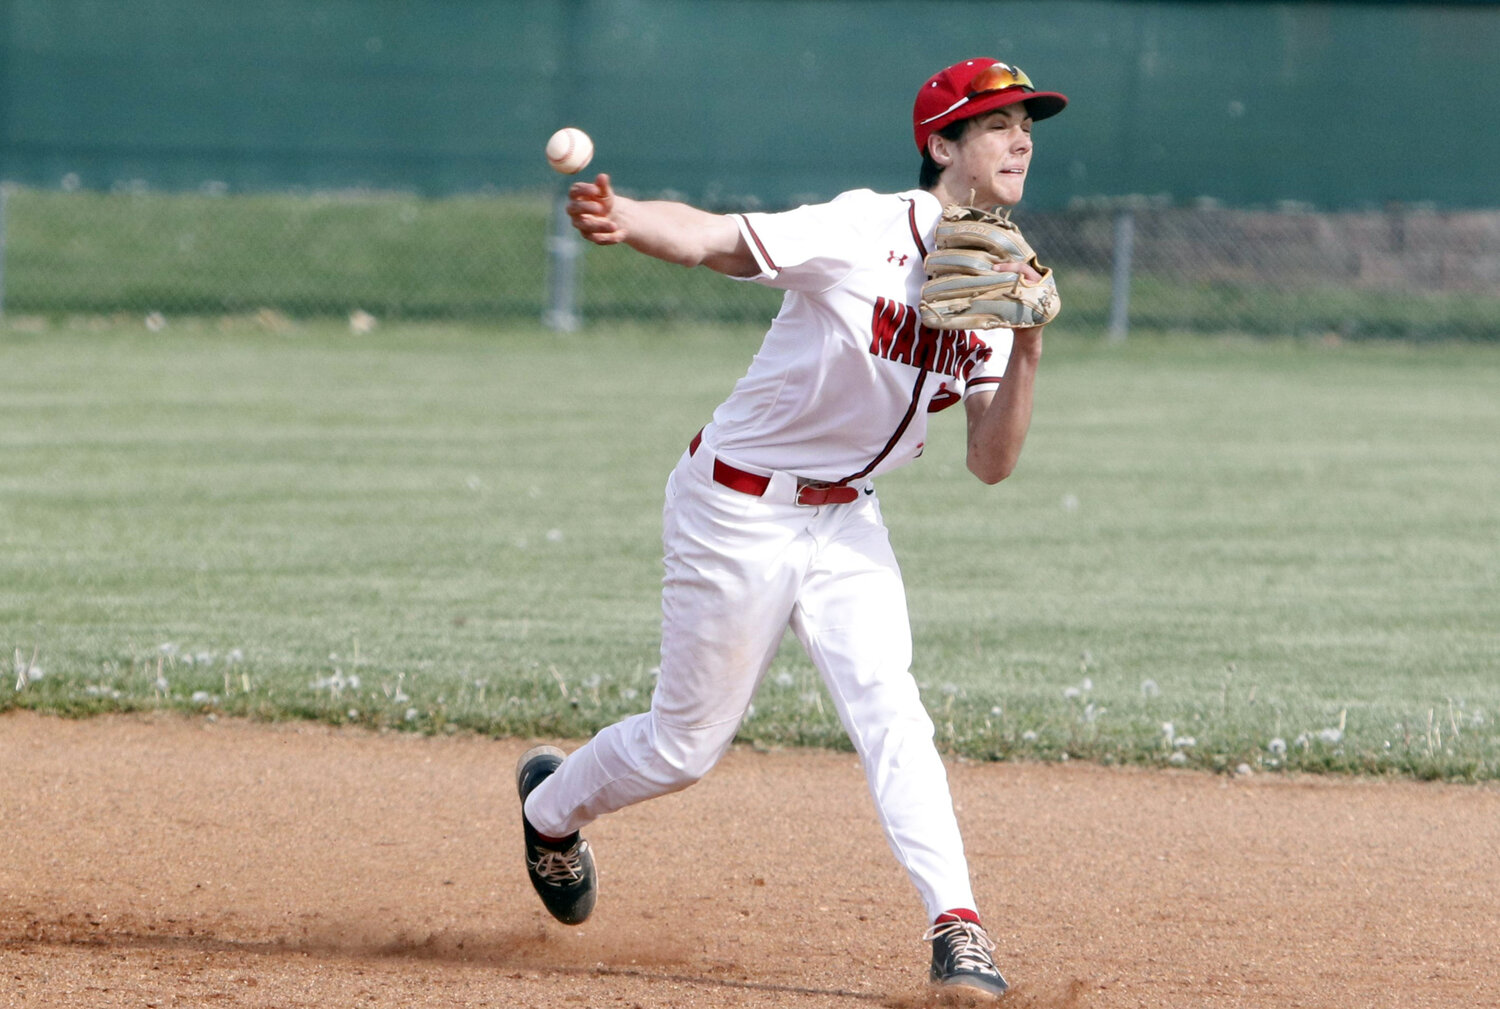 Warrenton shortstop Collin Disilvister throws the ball to first base to record an out.